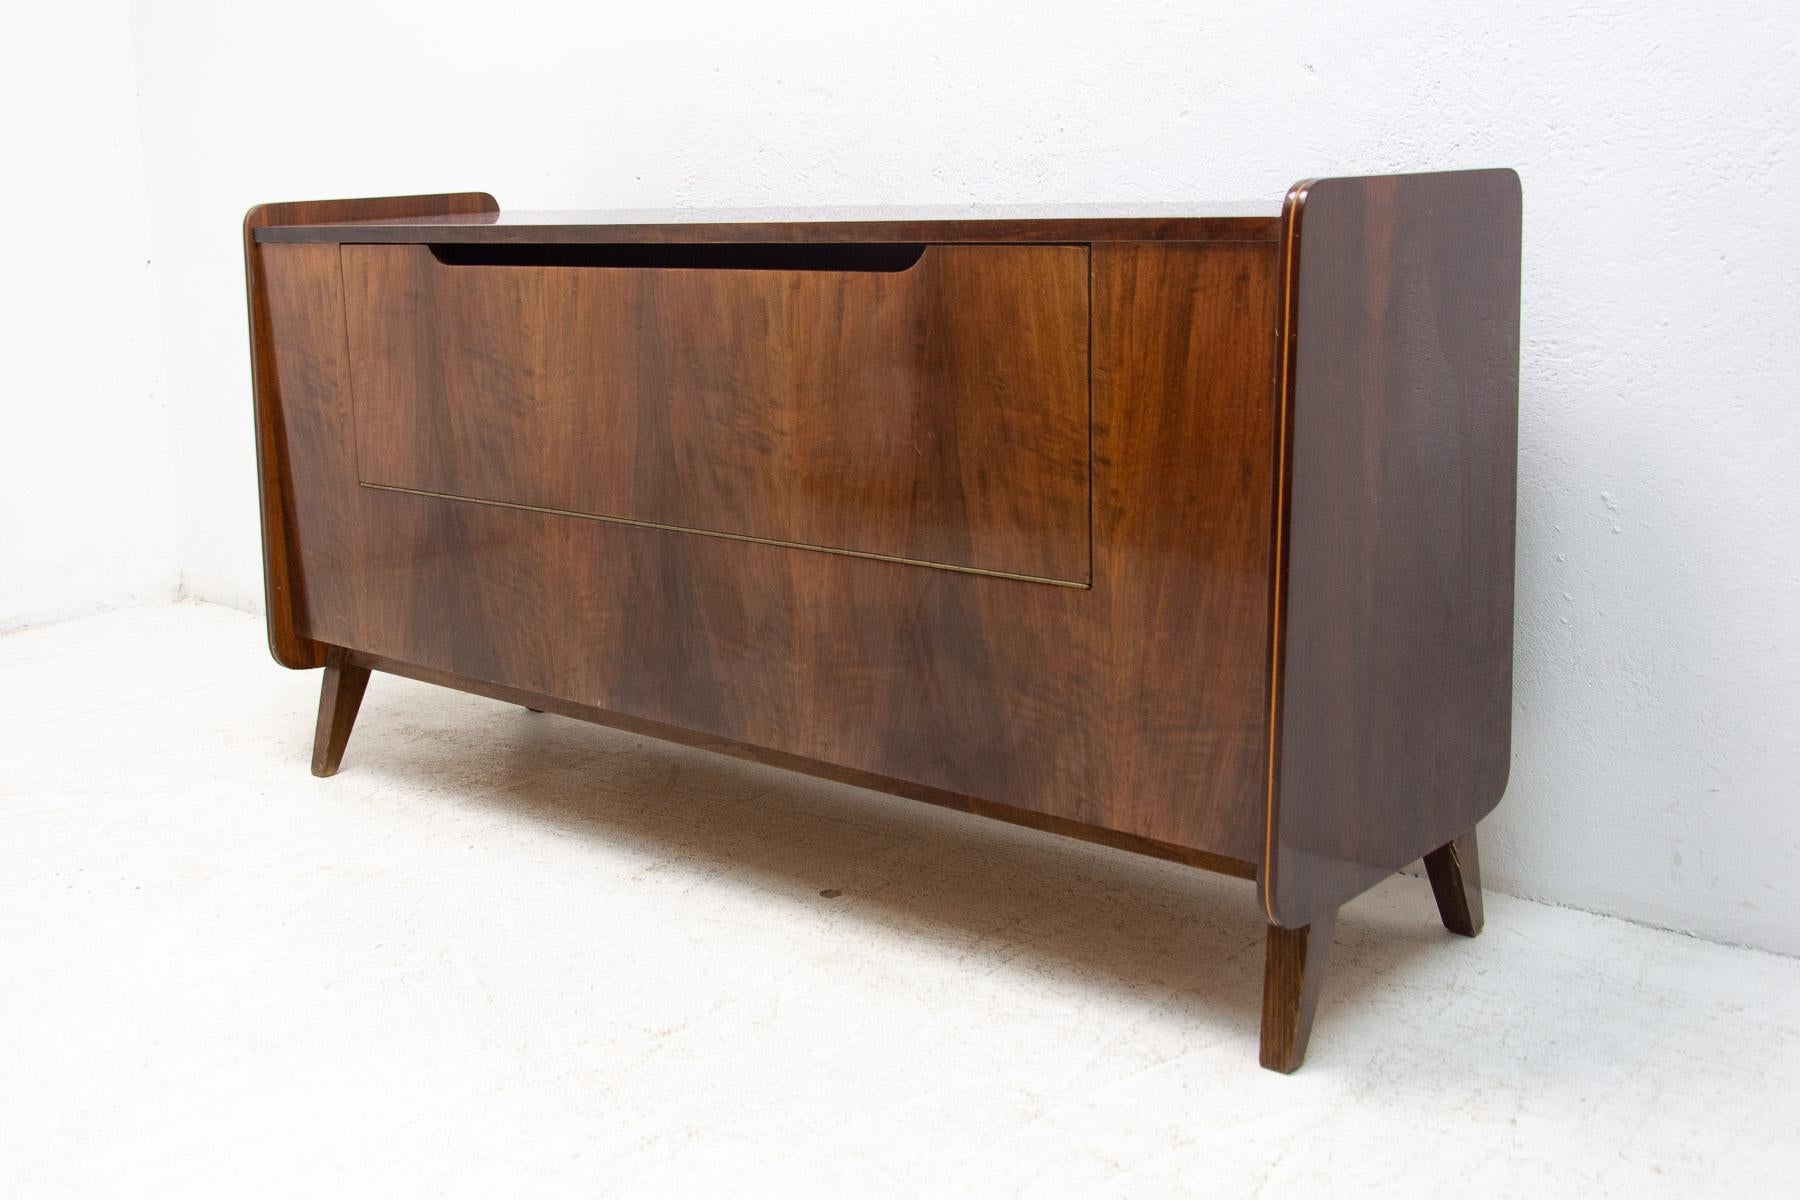 Vintage dresser from the 60s of the last century. Made in Czechoslovakia, designed by the famous Czechoslovak architect František Jirák for Tatra nábytok. In very good Vintage condition, showing signs of age and using. Beautiful walnut